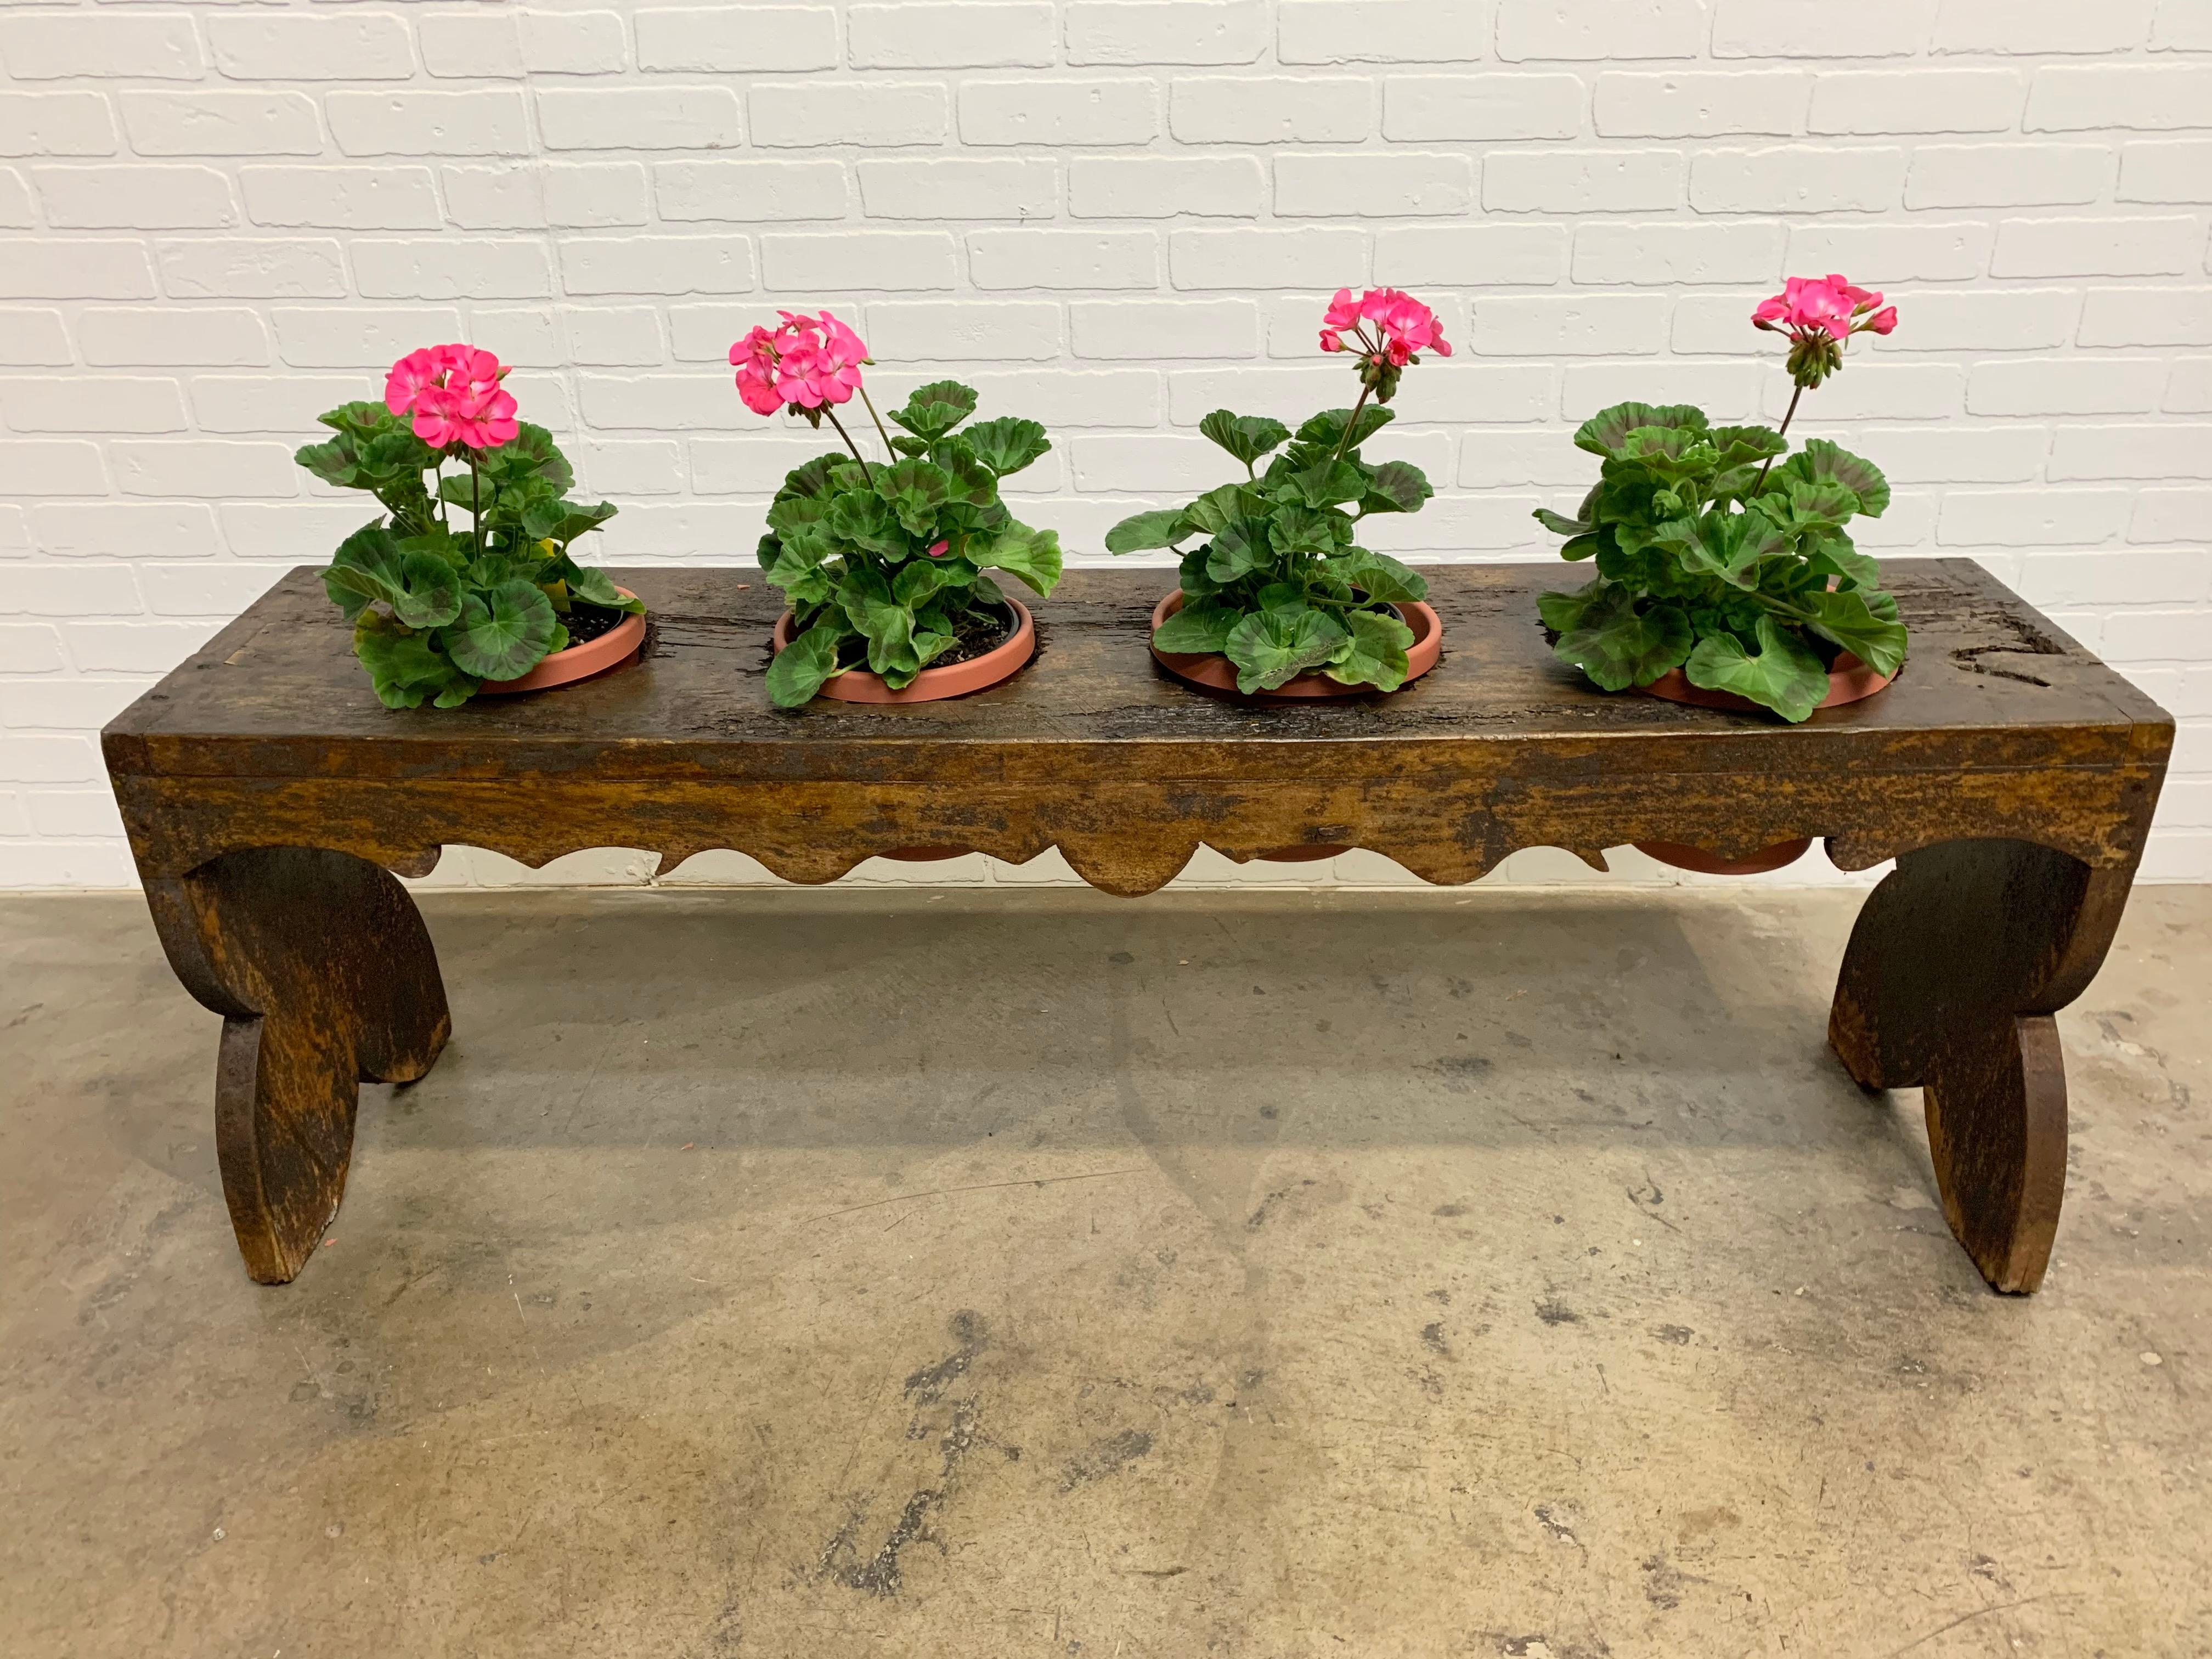 Antique rustic wood with faded paint add to the patina of this French potting bench.
The plants and pots are not included.